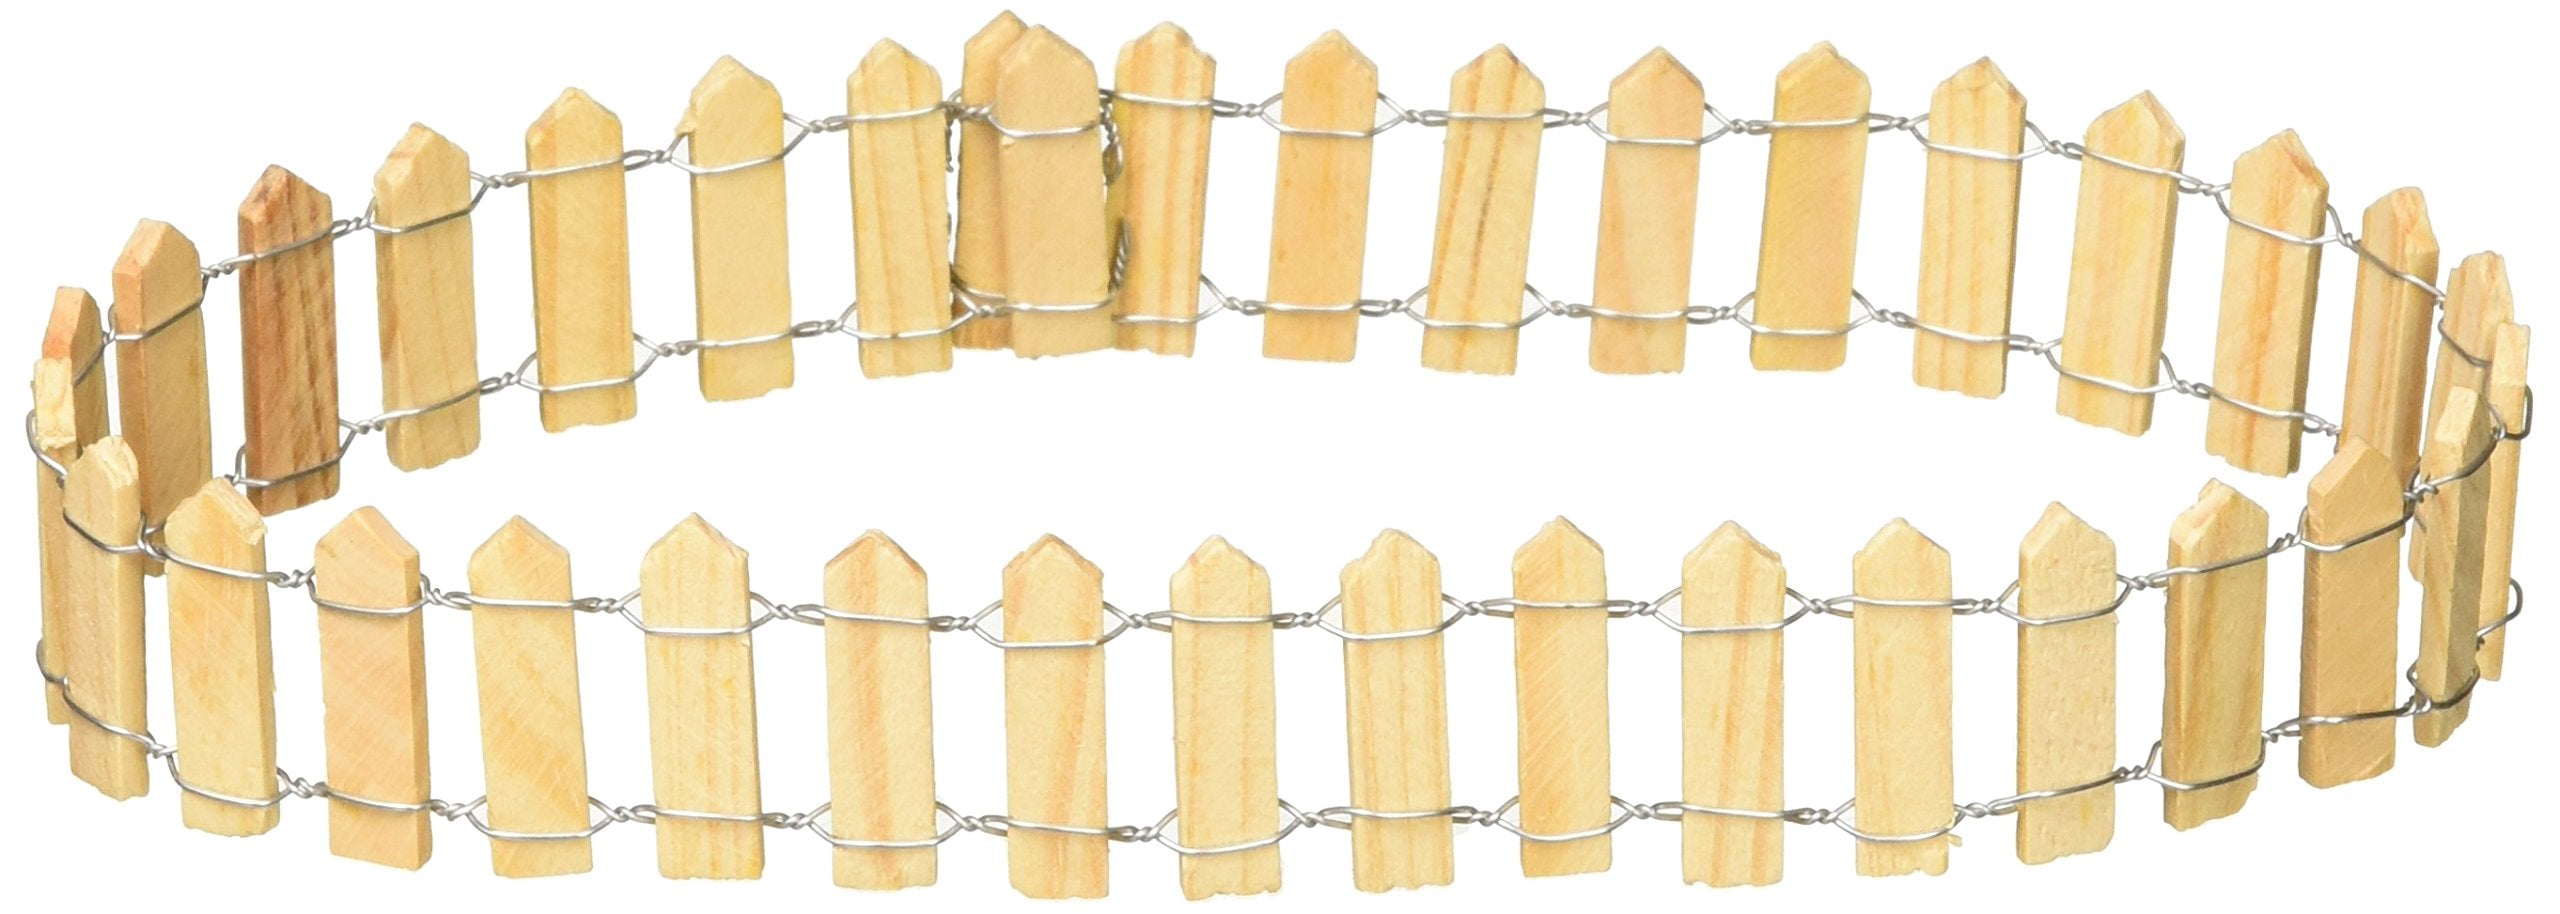 Darice 9154-68 Wood Picket Fence, Natural  - Acceptable